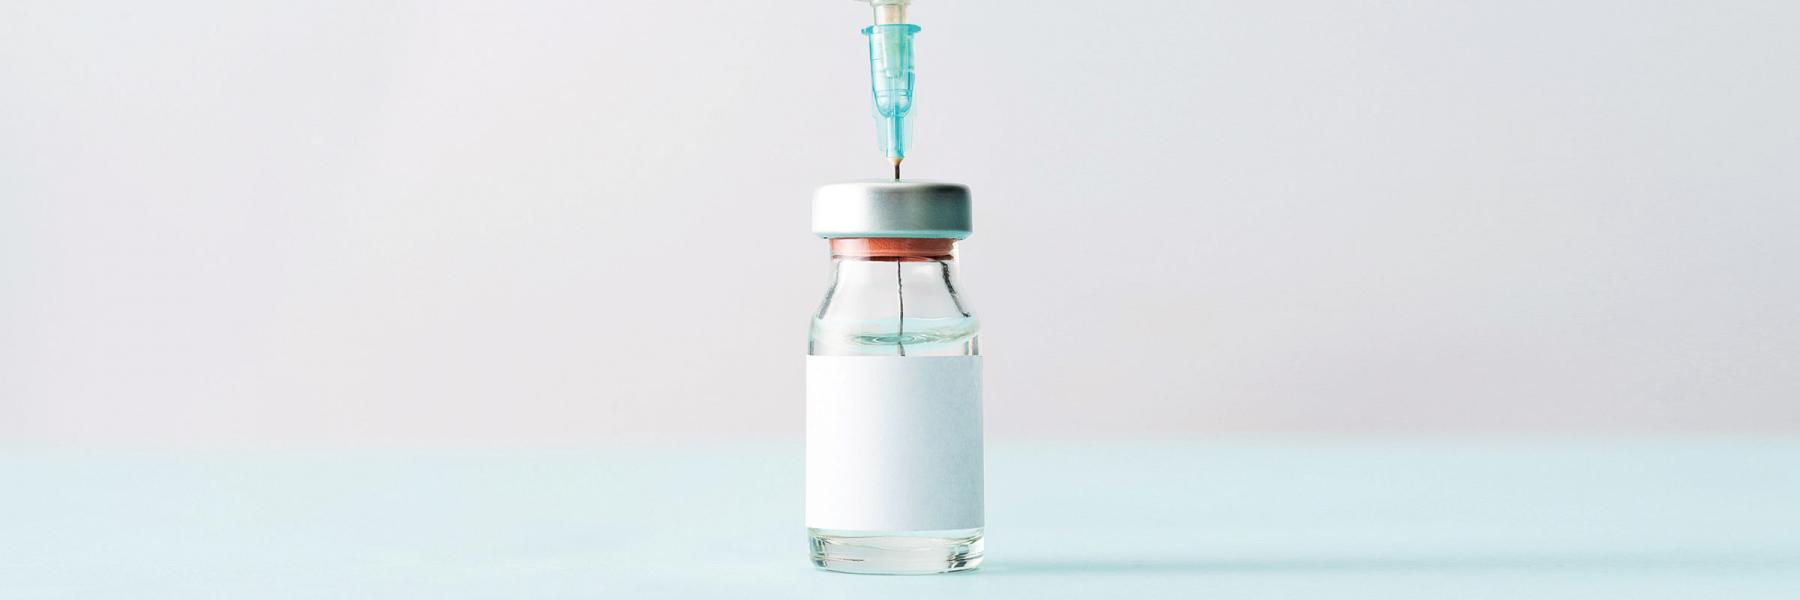 Positively Aware: HIV long-acting injectable Cabenuva